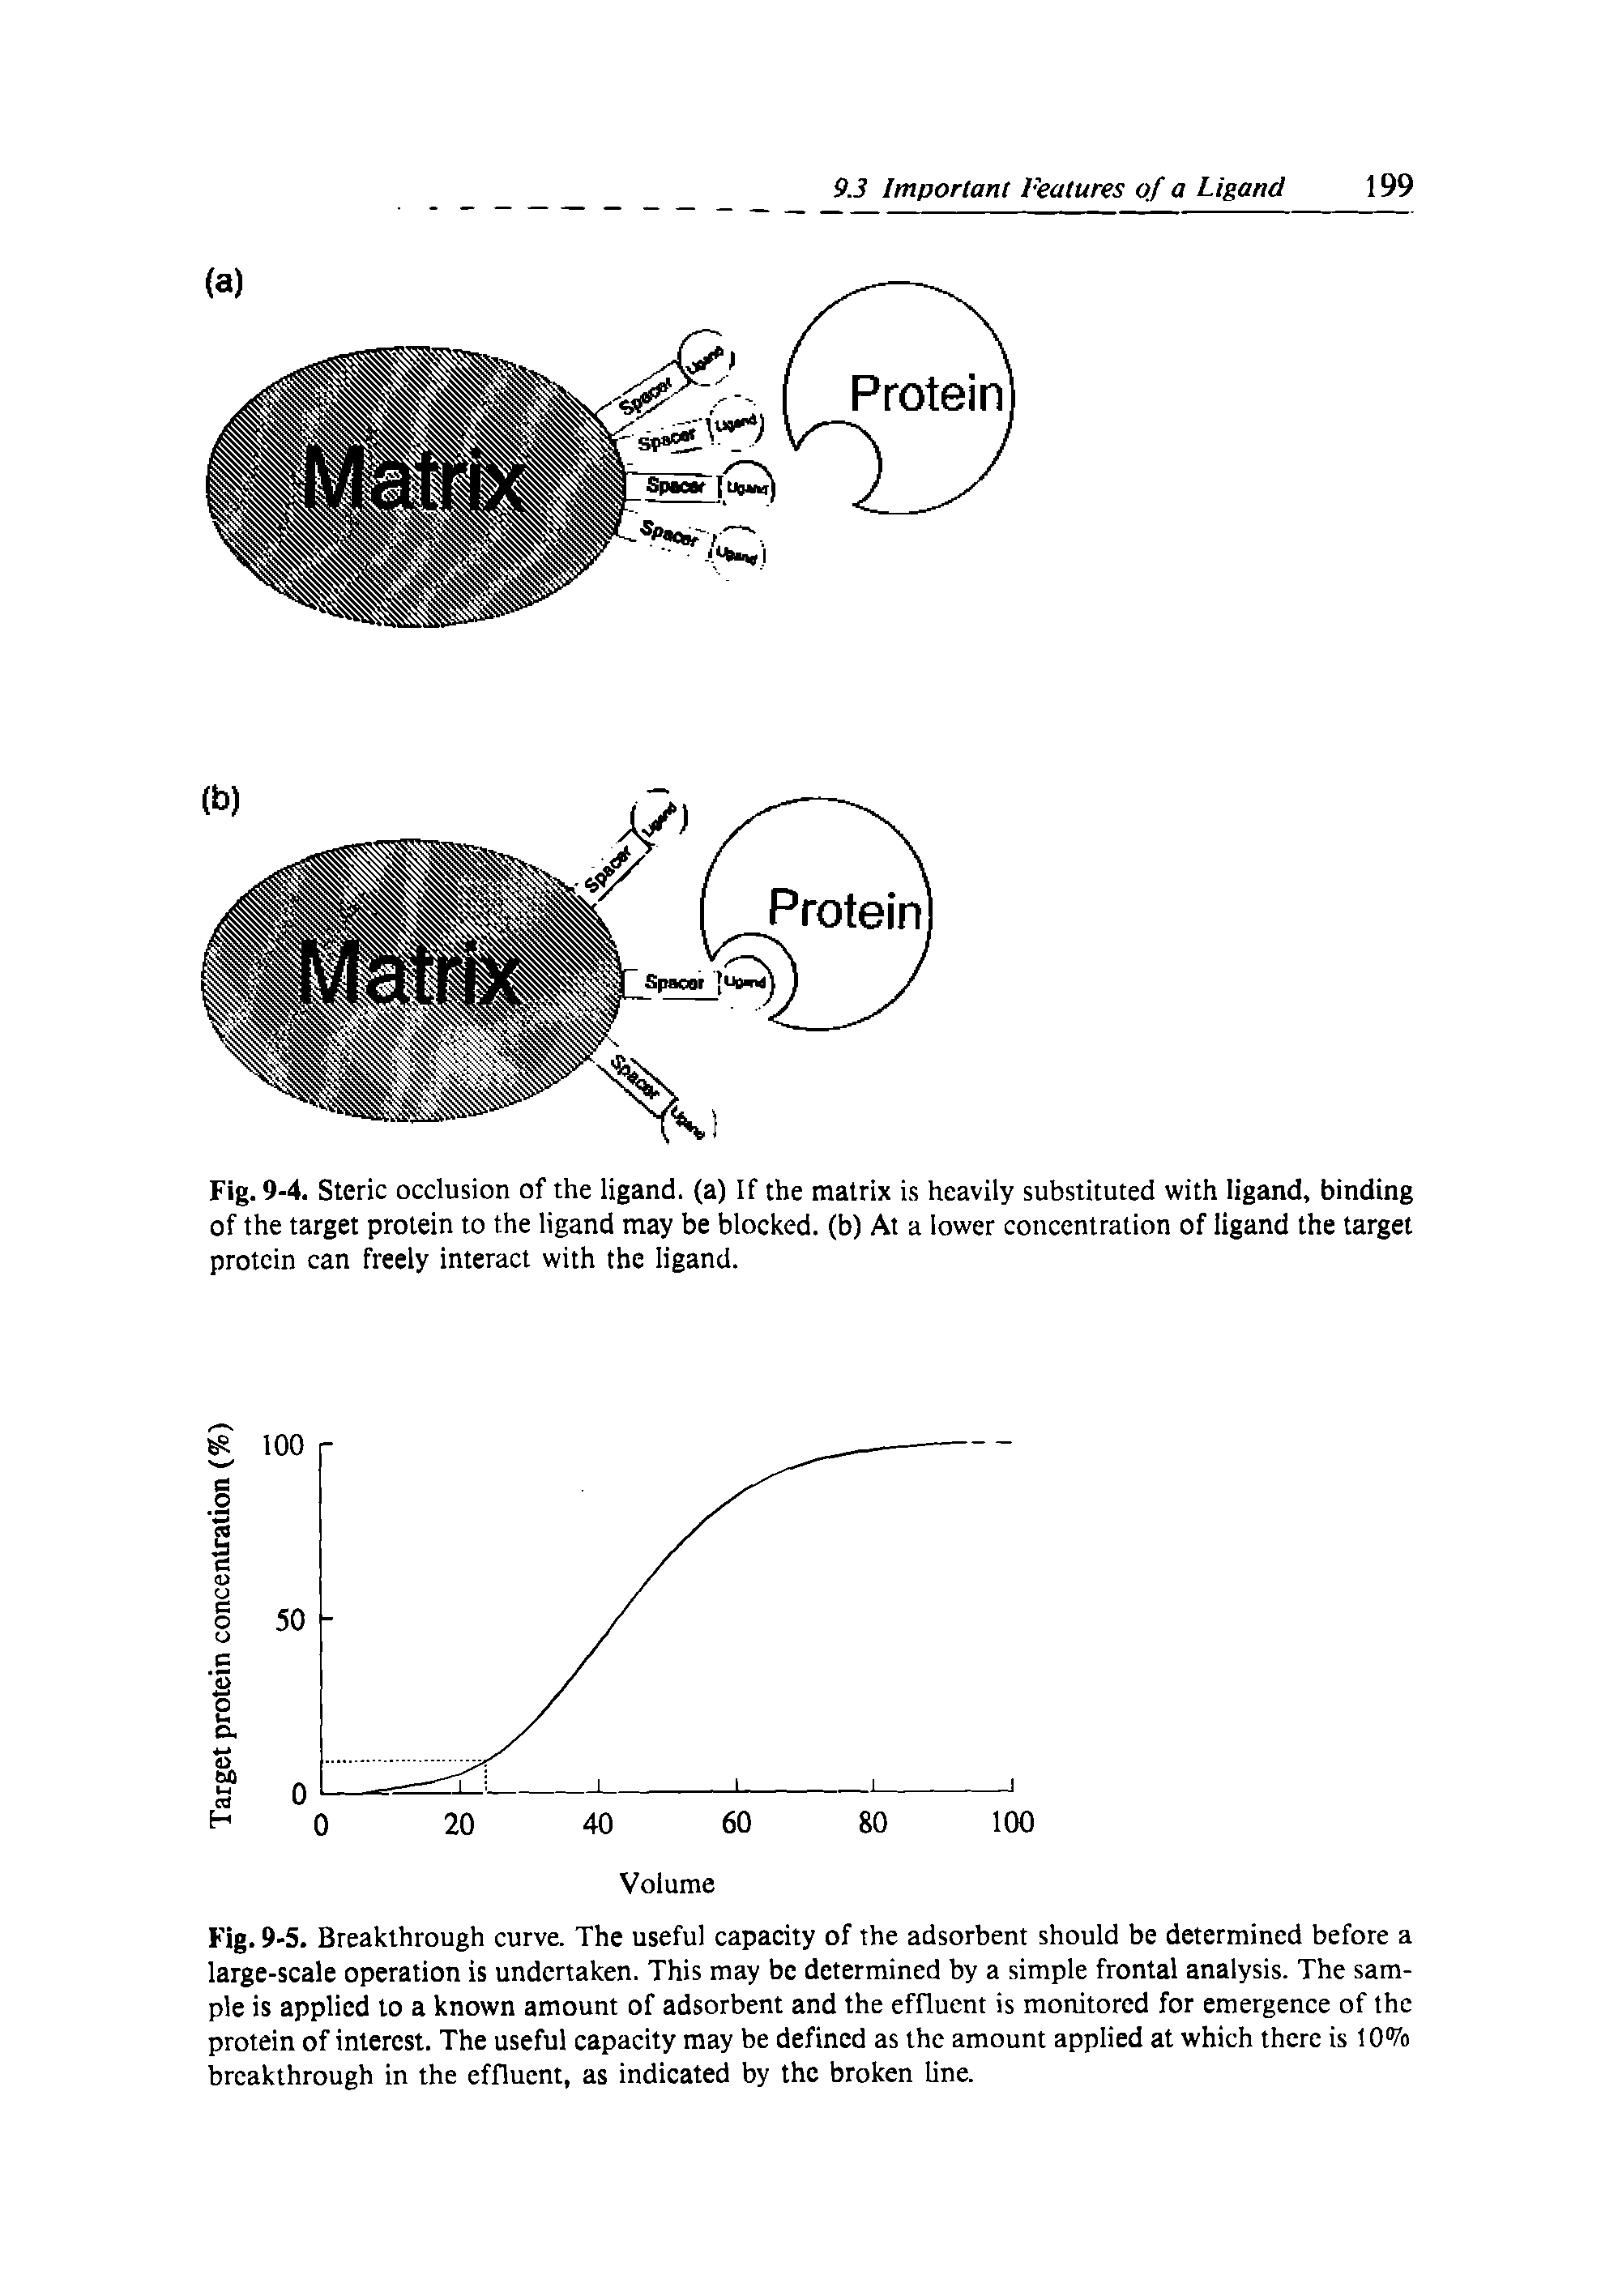 Fig. 9-4. Steric occlusion of the ligand, (a) If the matrix is heavily substituted with ligand, binding of the target protein to the ligand may be blocked, (b) At a lower concentration of ligand the target protein can freely interact with the ligand.